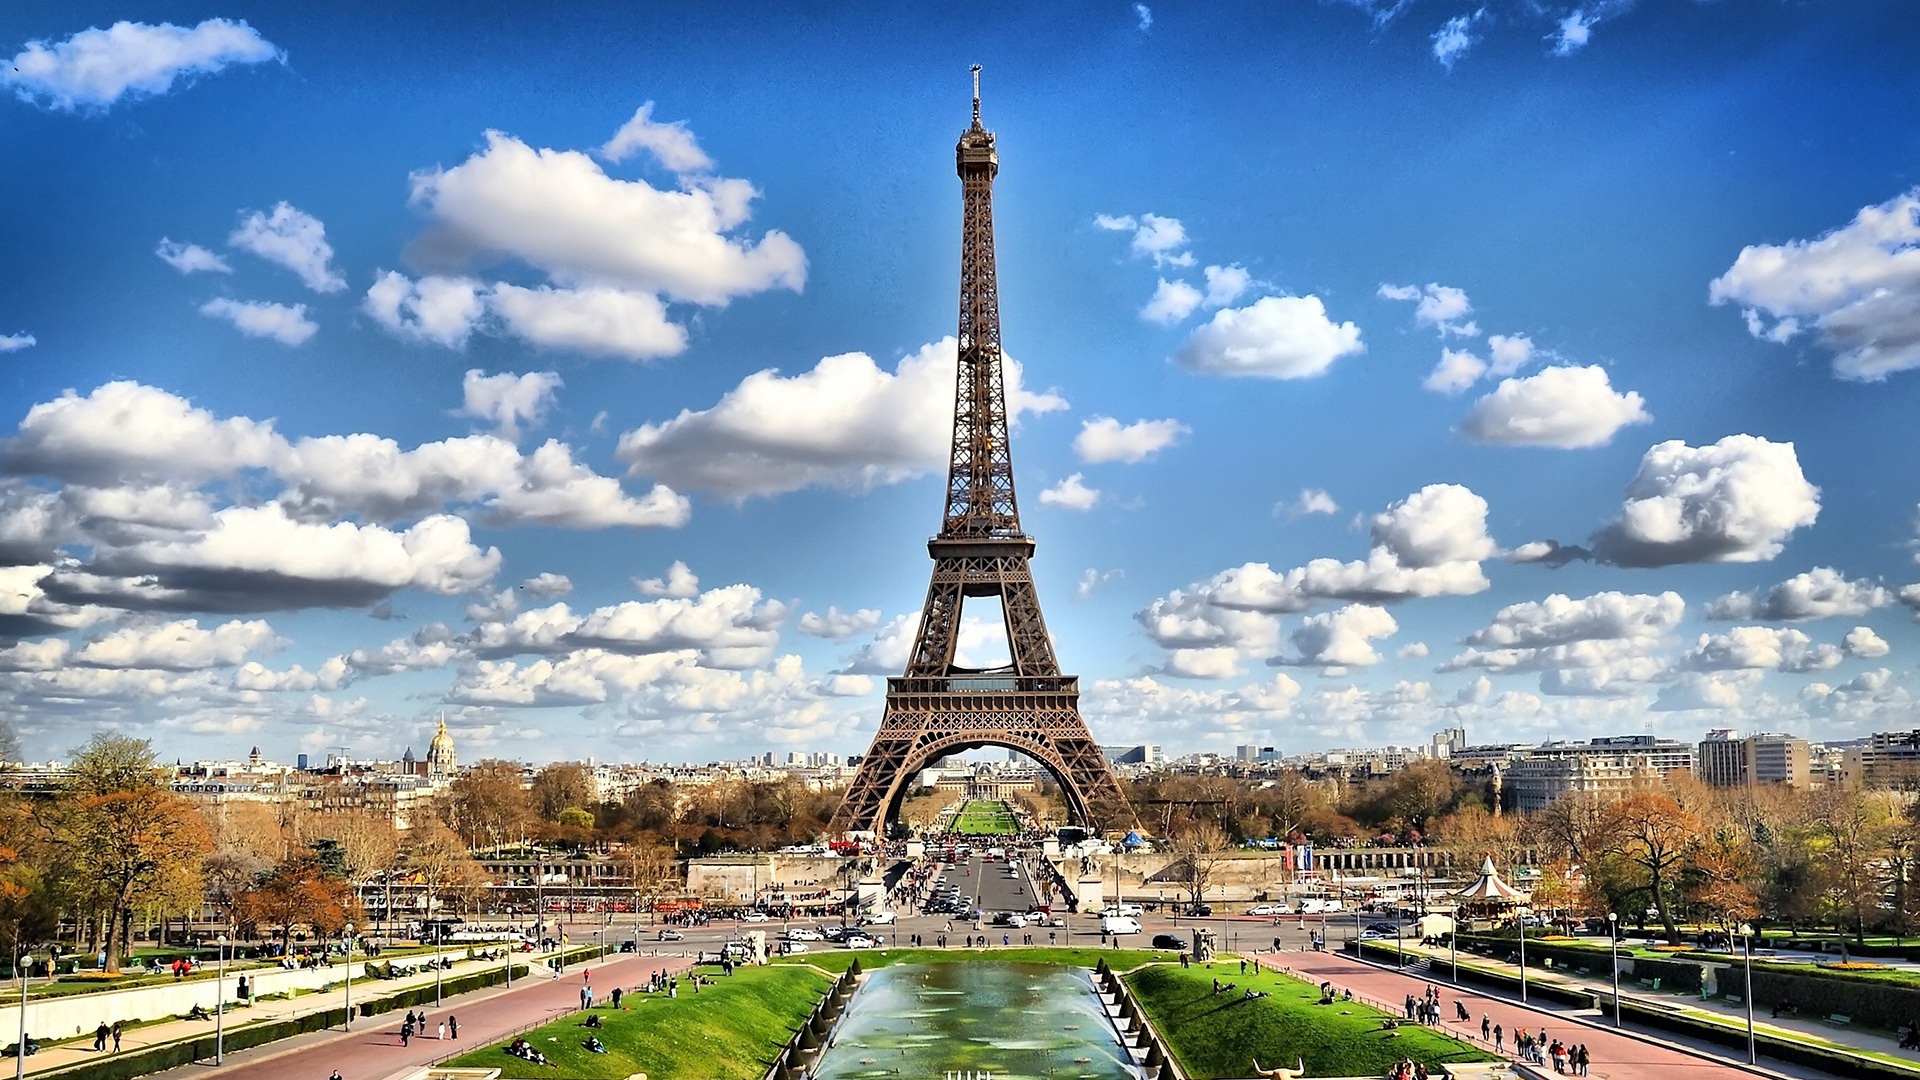 Eiffel Tower On Background Of Clouds In Paris France Wallpaper And